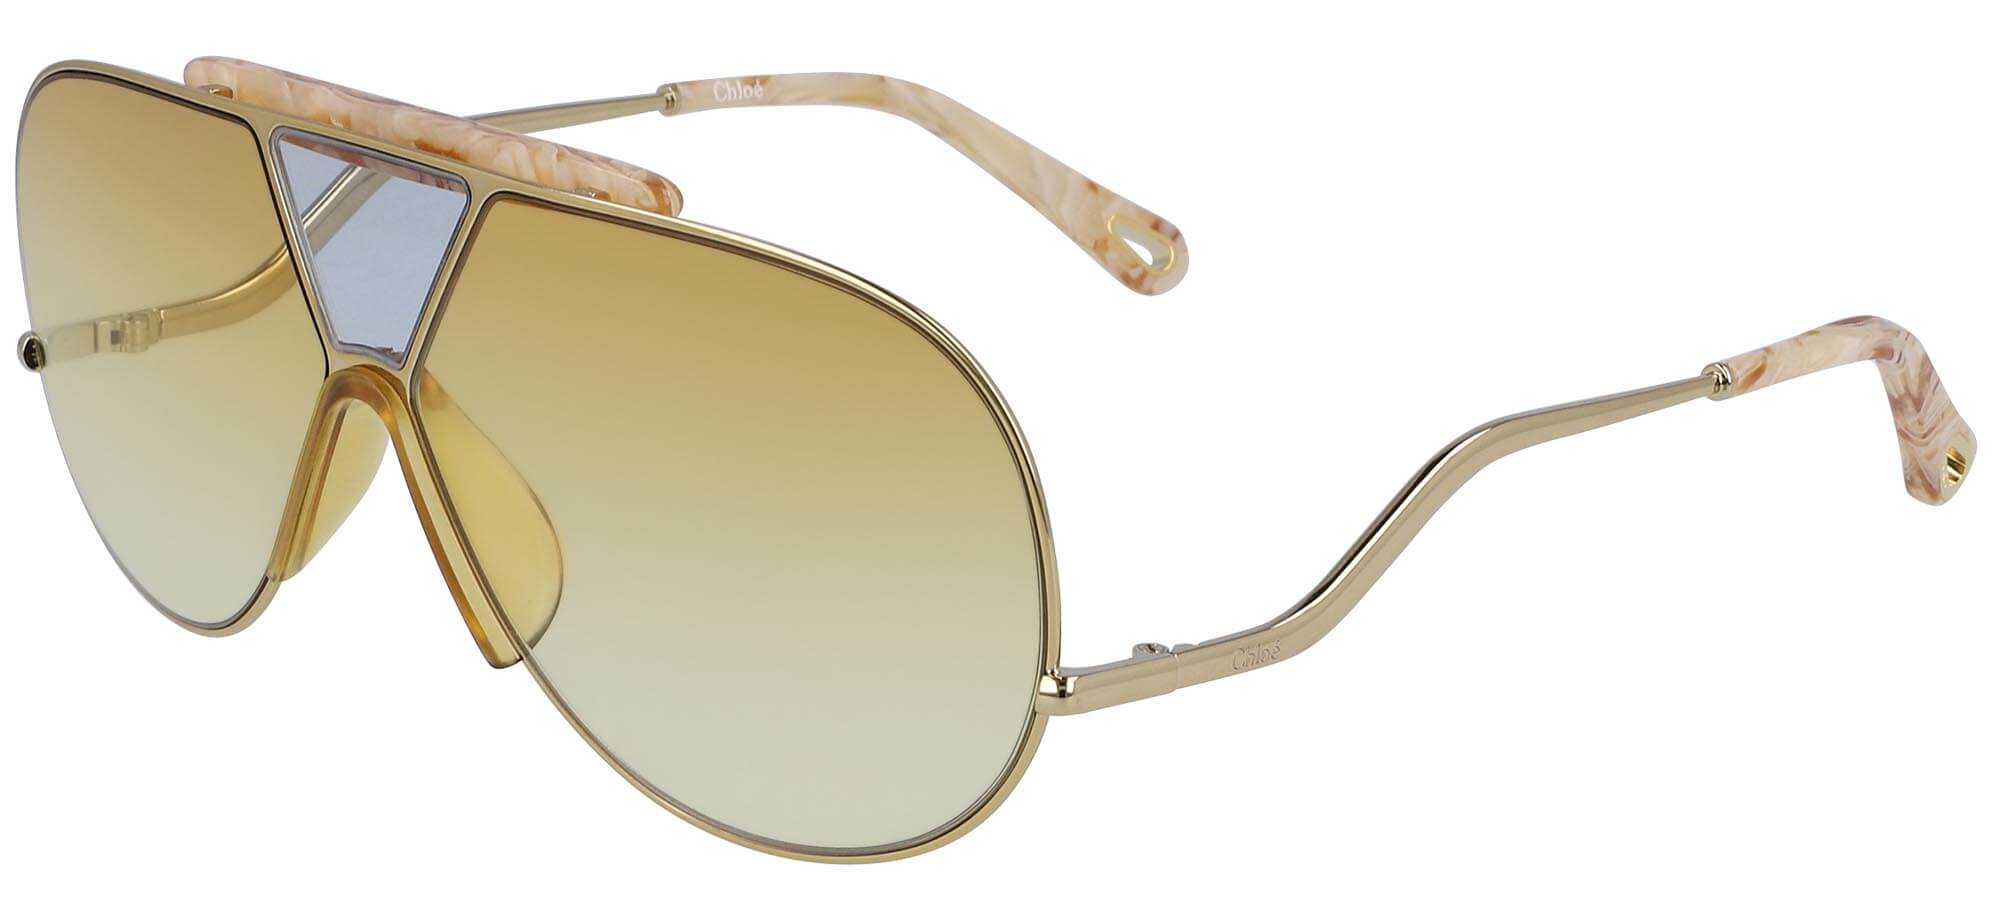 ChloéWILLIS CE154SYellow Gold/yellow Shaded (821 A)